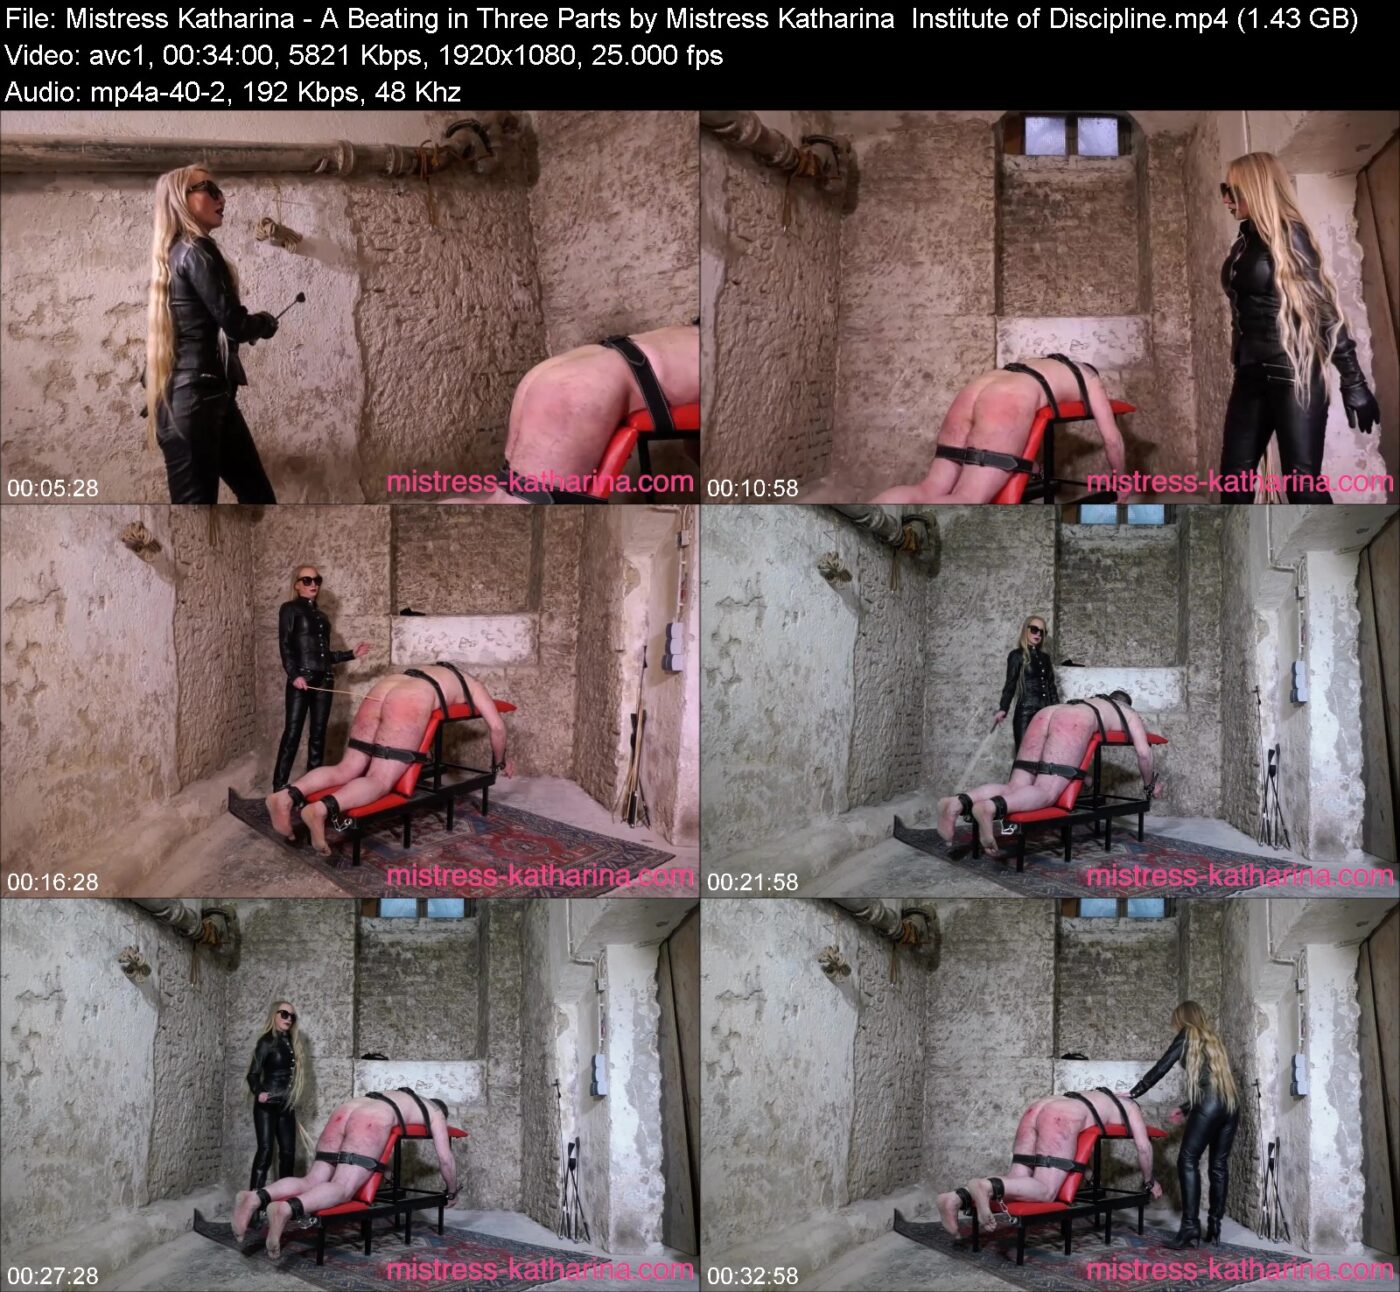 Actress: Mistress Katharina. Title and Studio: A Beating in Three Parts by Mistress Katharina  Institute of Discipline